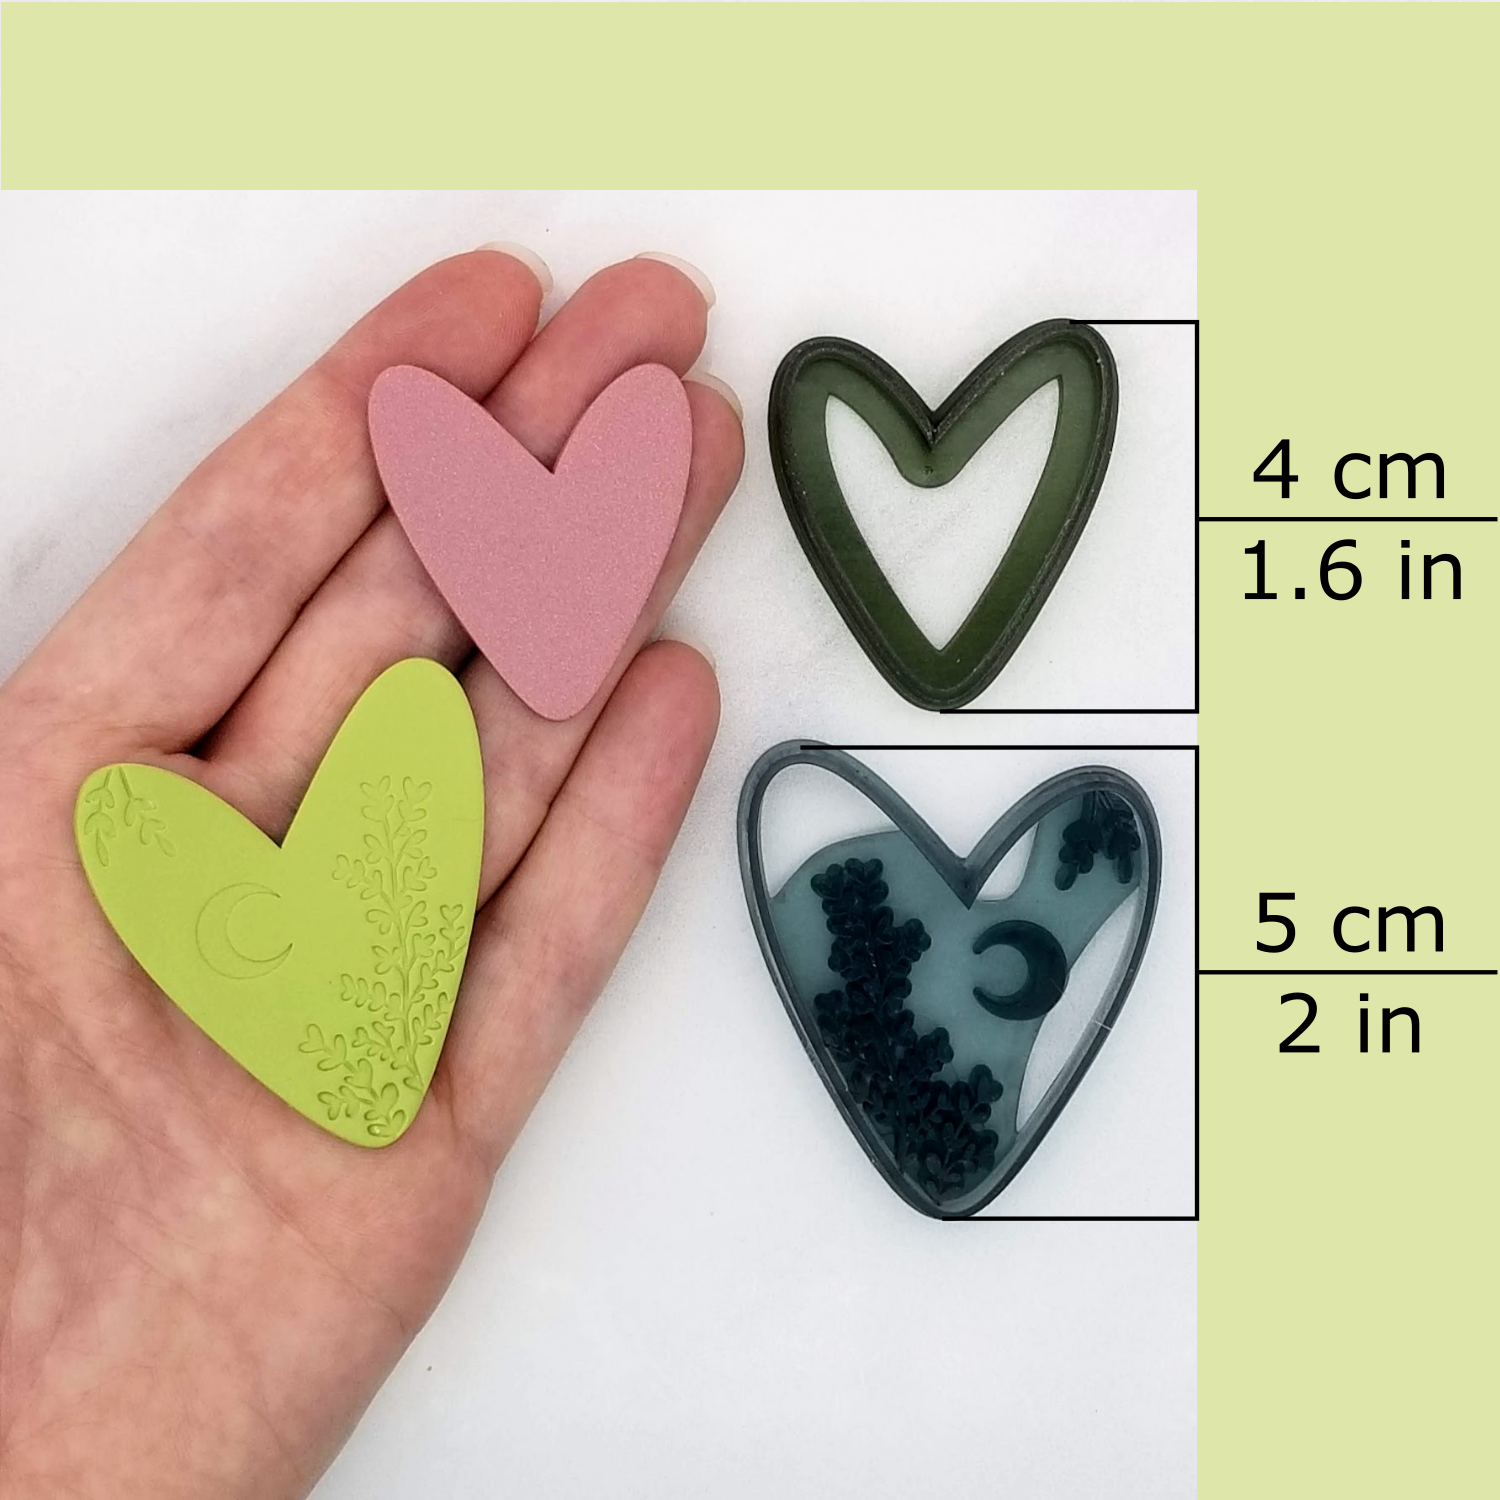 Boho heart outline clay cutter available size, 4 centimeters / 1.6 inches, and debossing clay cutter 5 centimeters / 2 inches